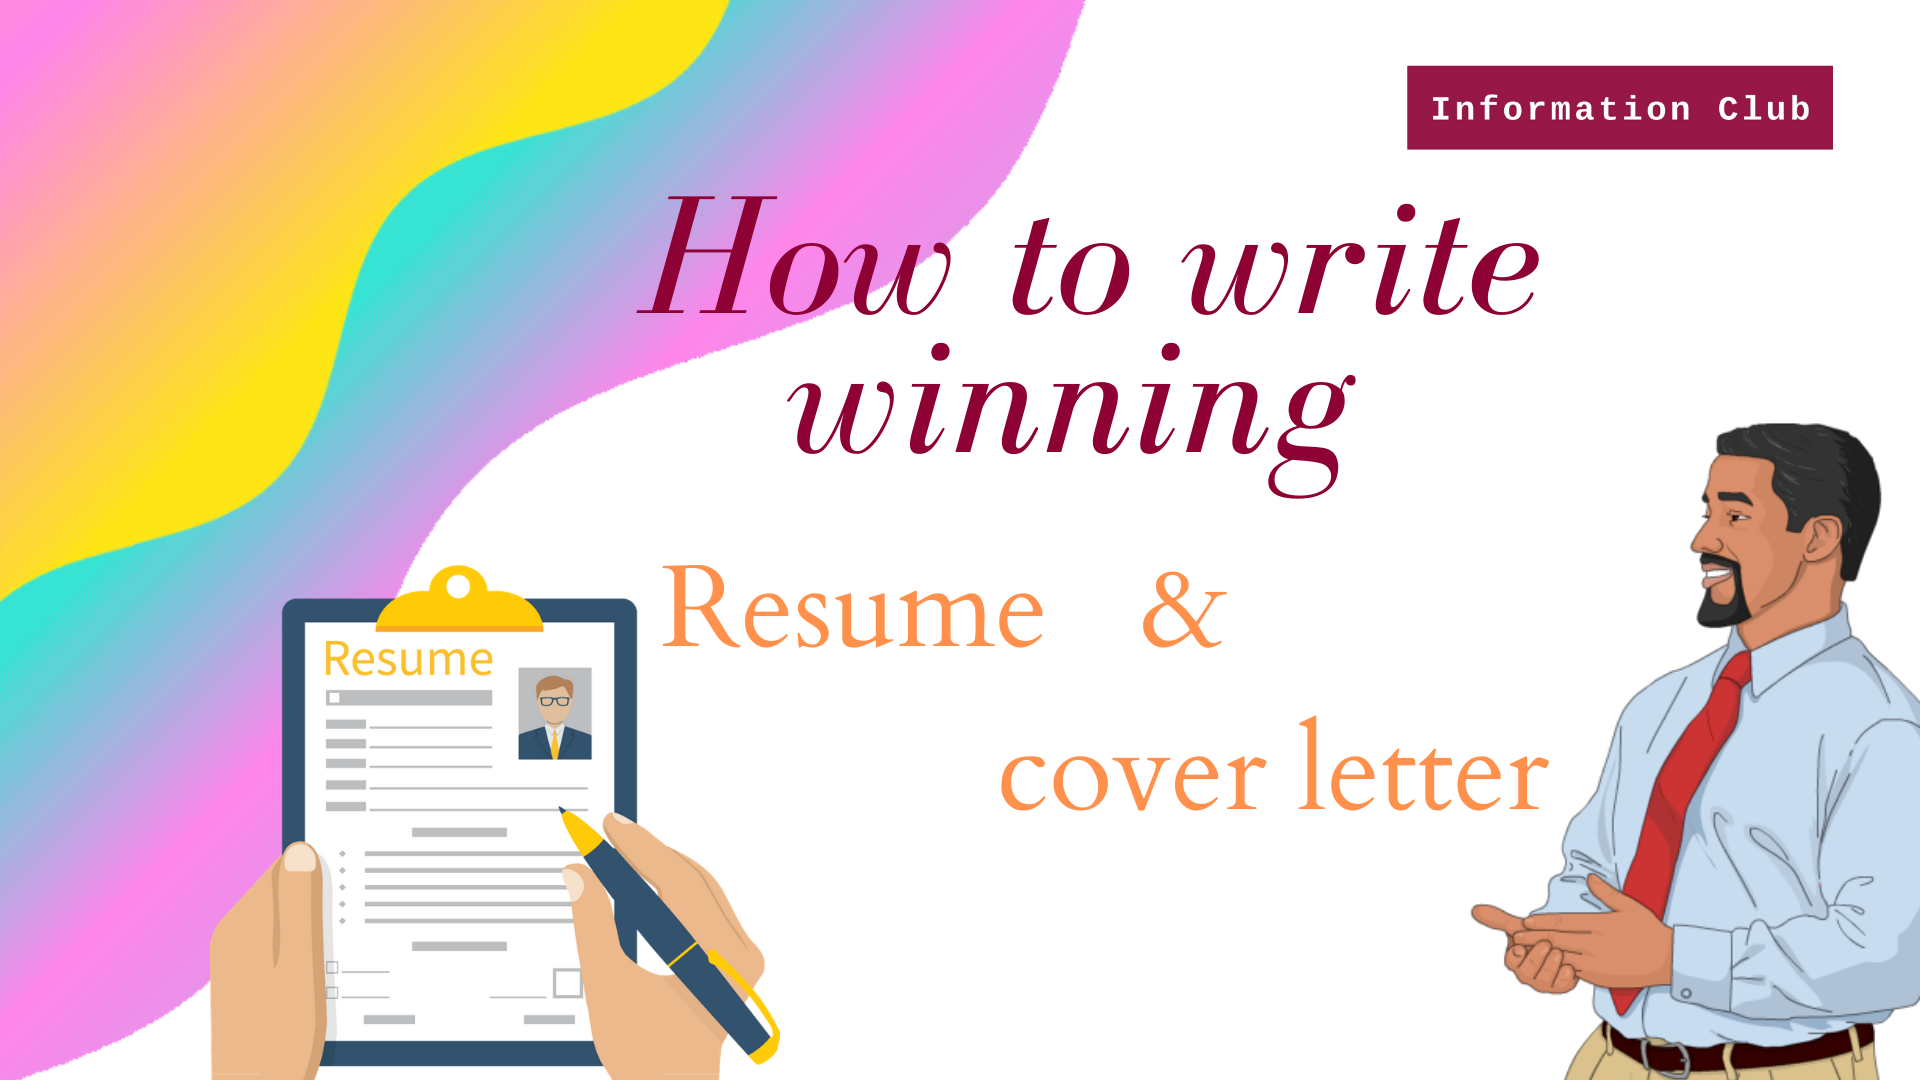 How to Write a Good Resume & an Amazing Cover Letter